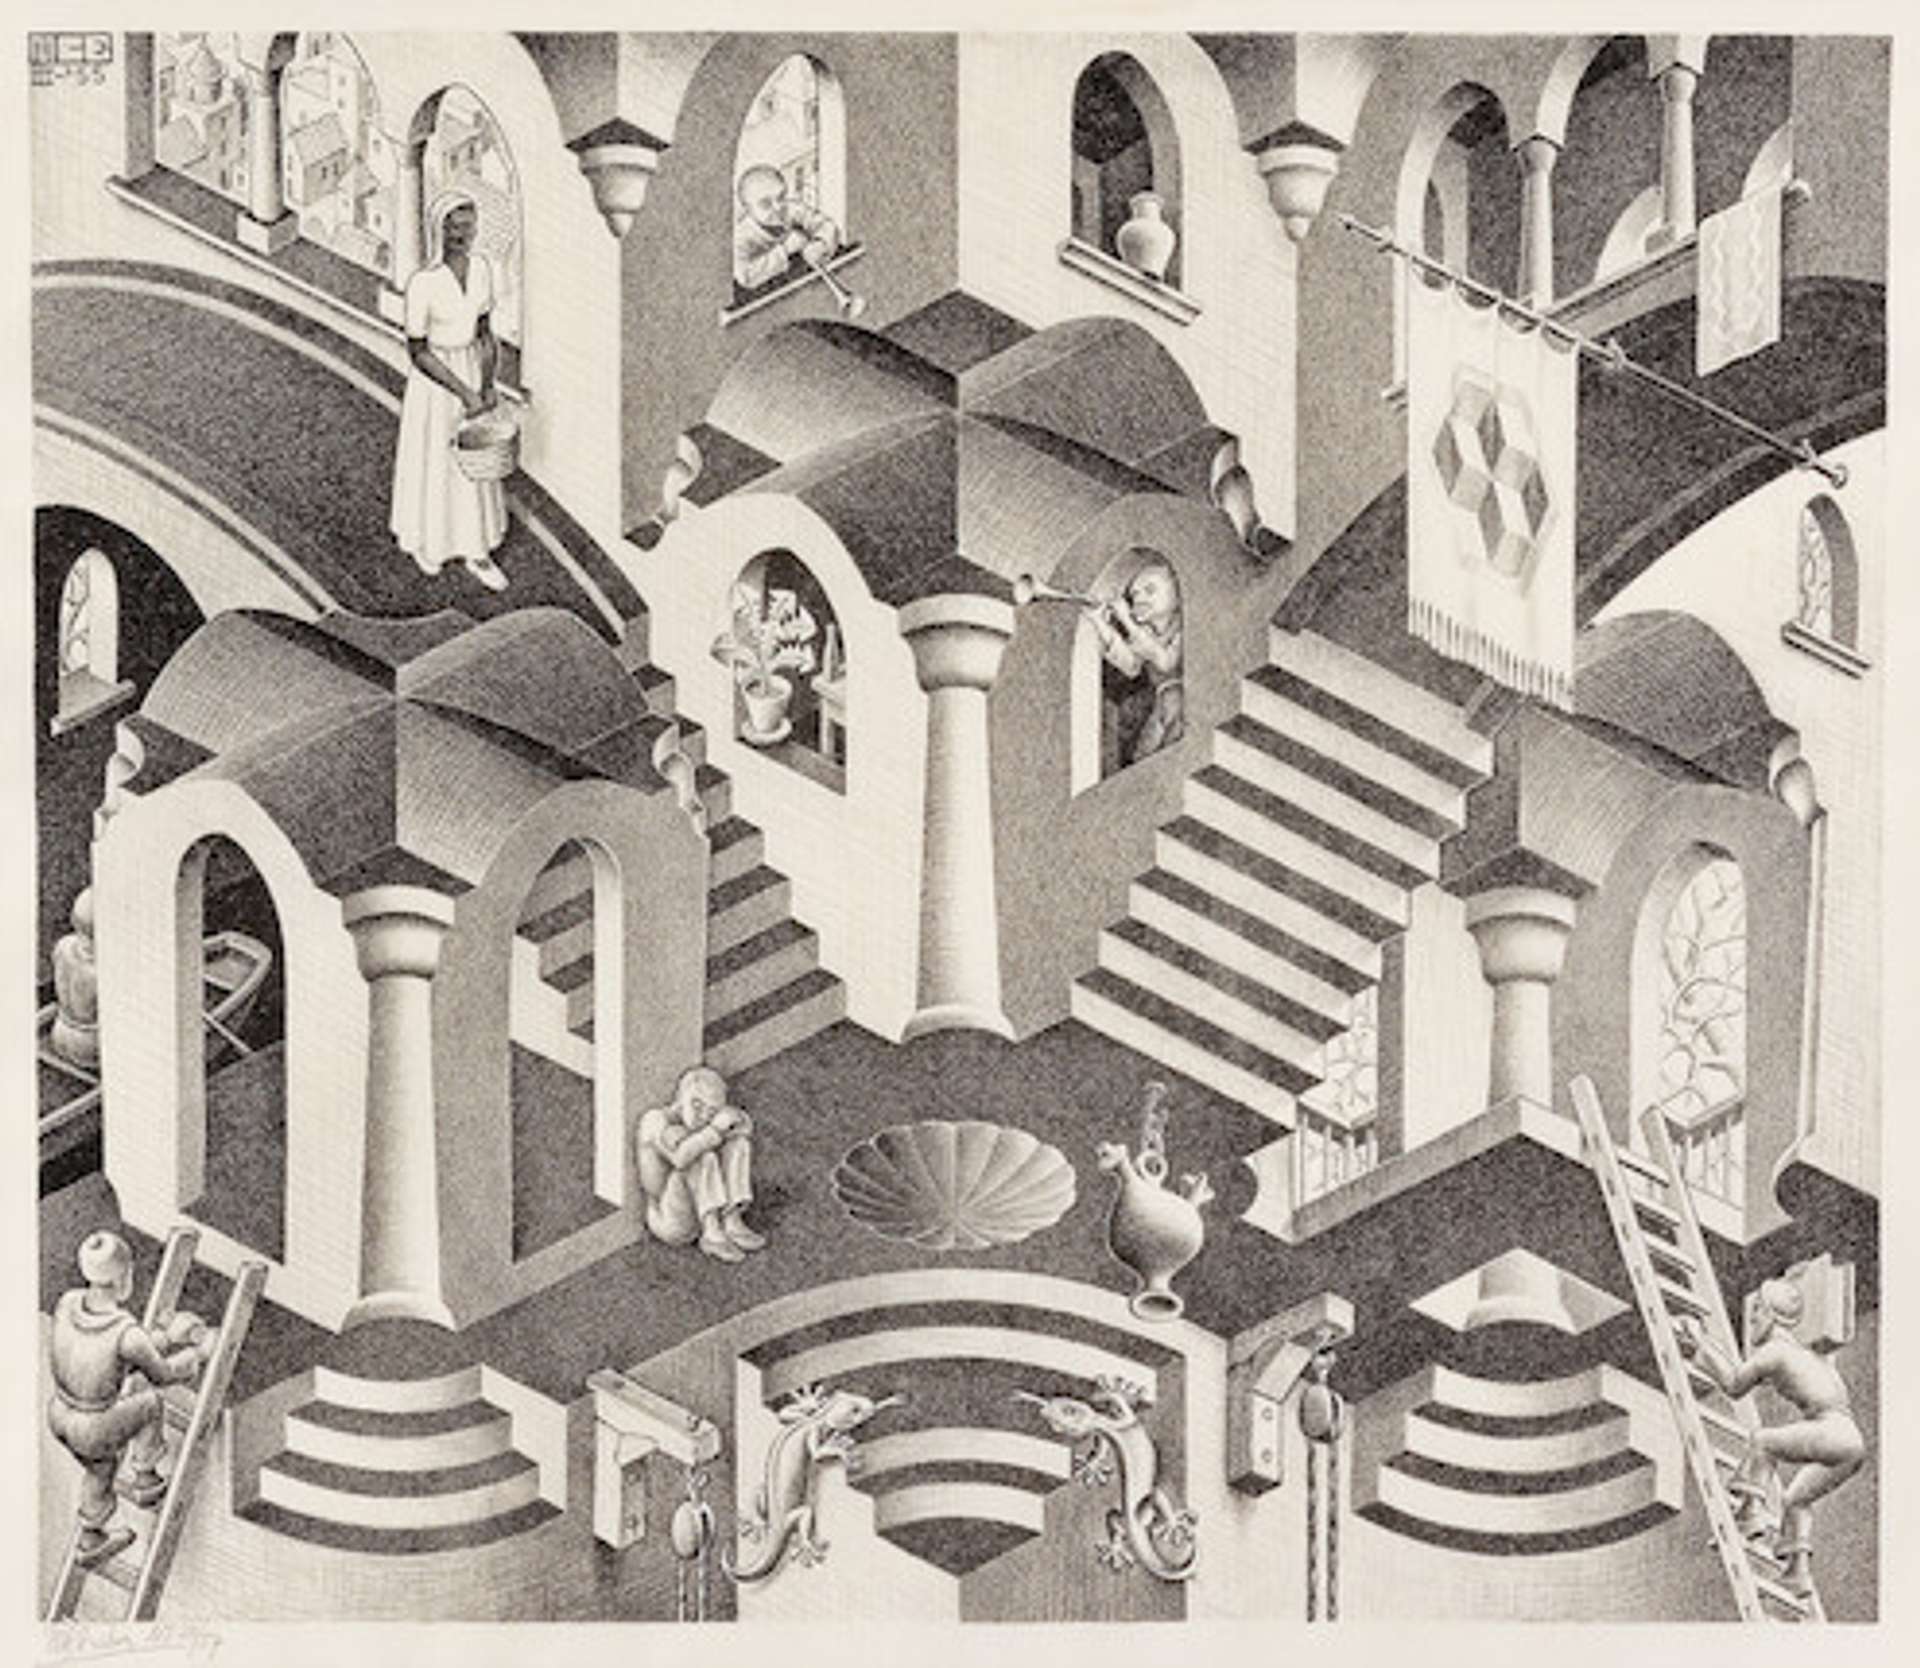 Convex and Concave by M. C. Escher. The print shows a series of staircases and arches which defy perspective.